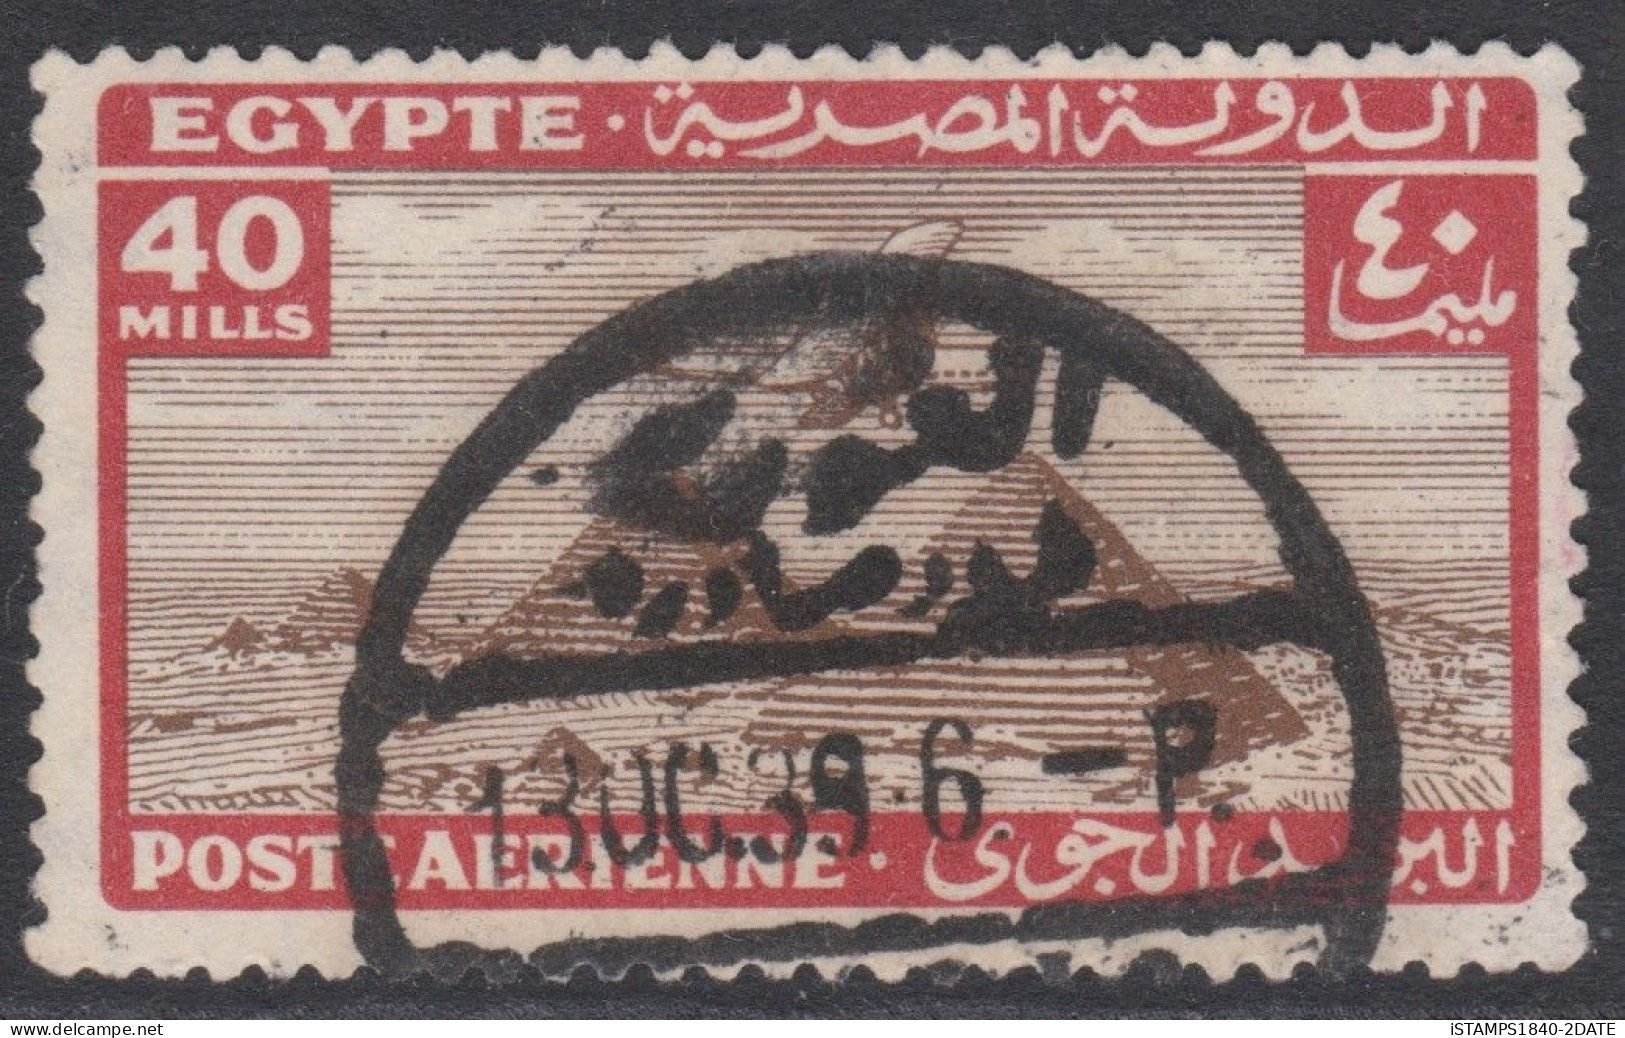 00678/ Egypt 1934/38 Air Mail 40m Used Plane Over Pyramid - Poste Aérienne